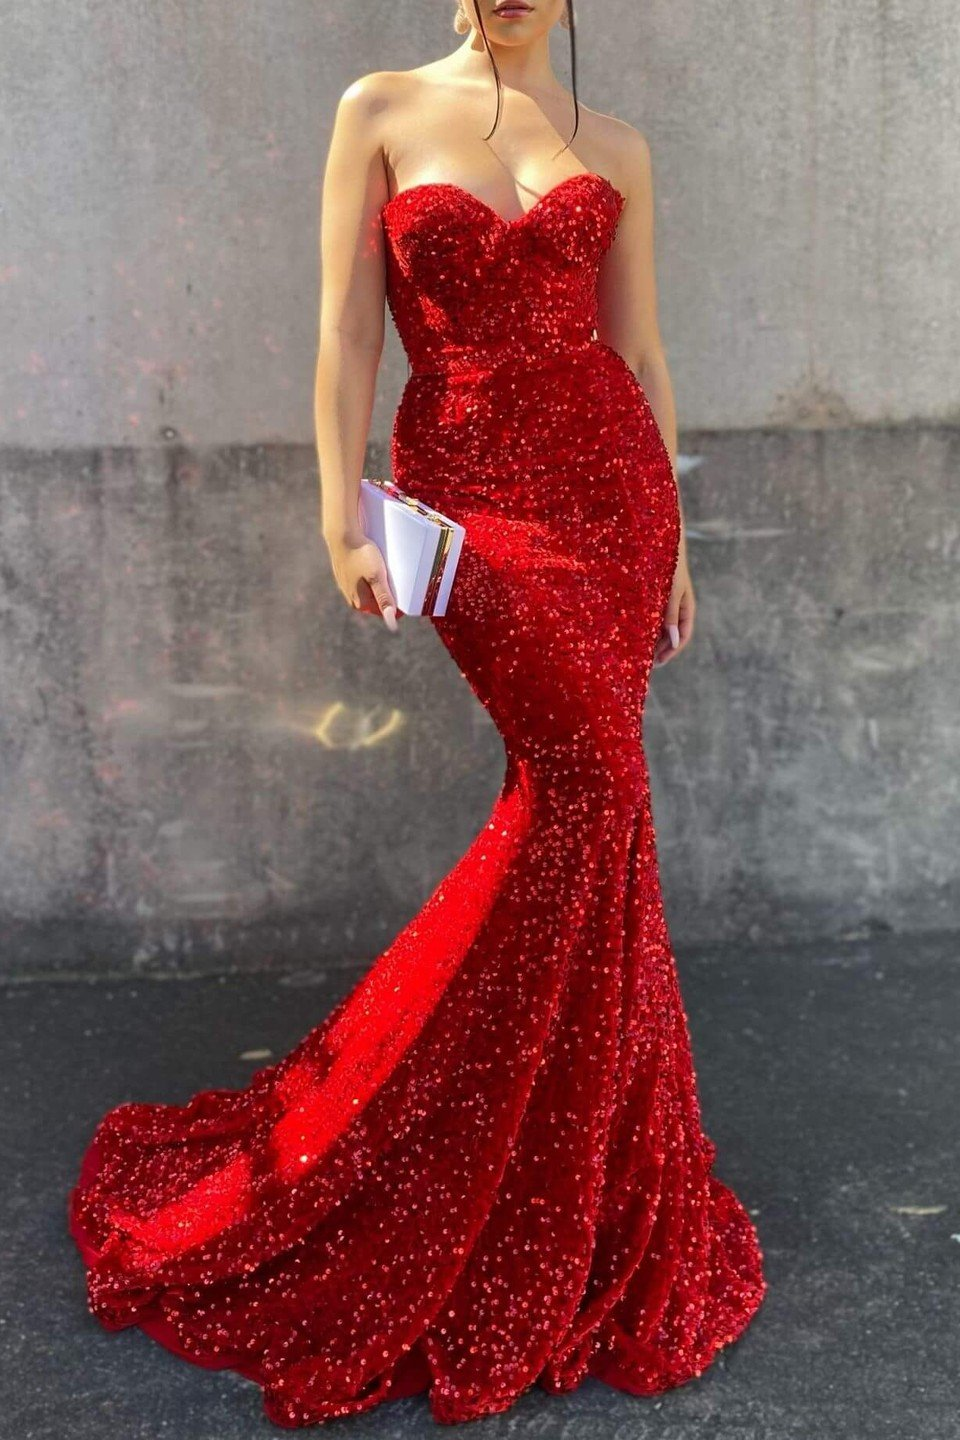 Red Sweetheart Long Mermaid Prom Dress With Sequins gh754